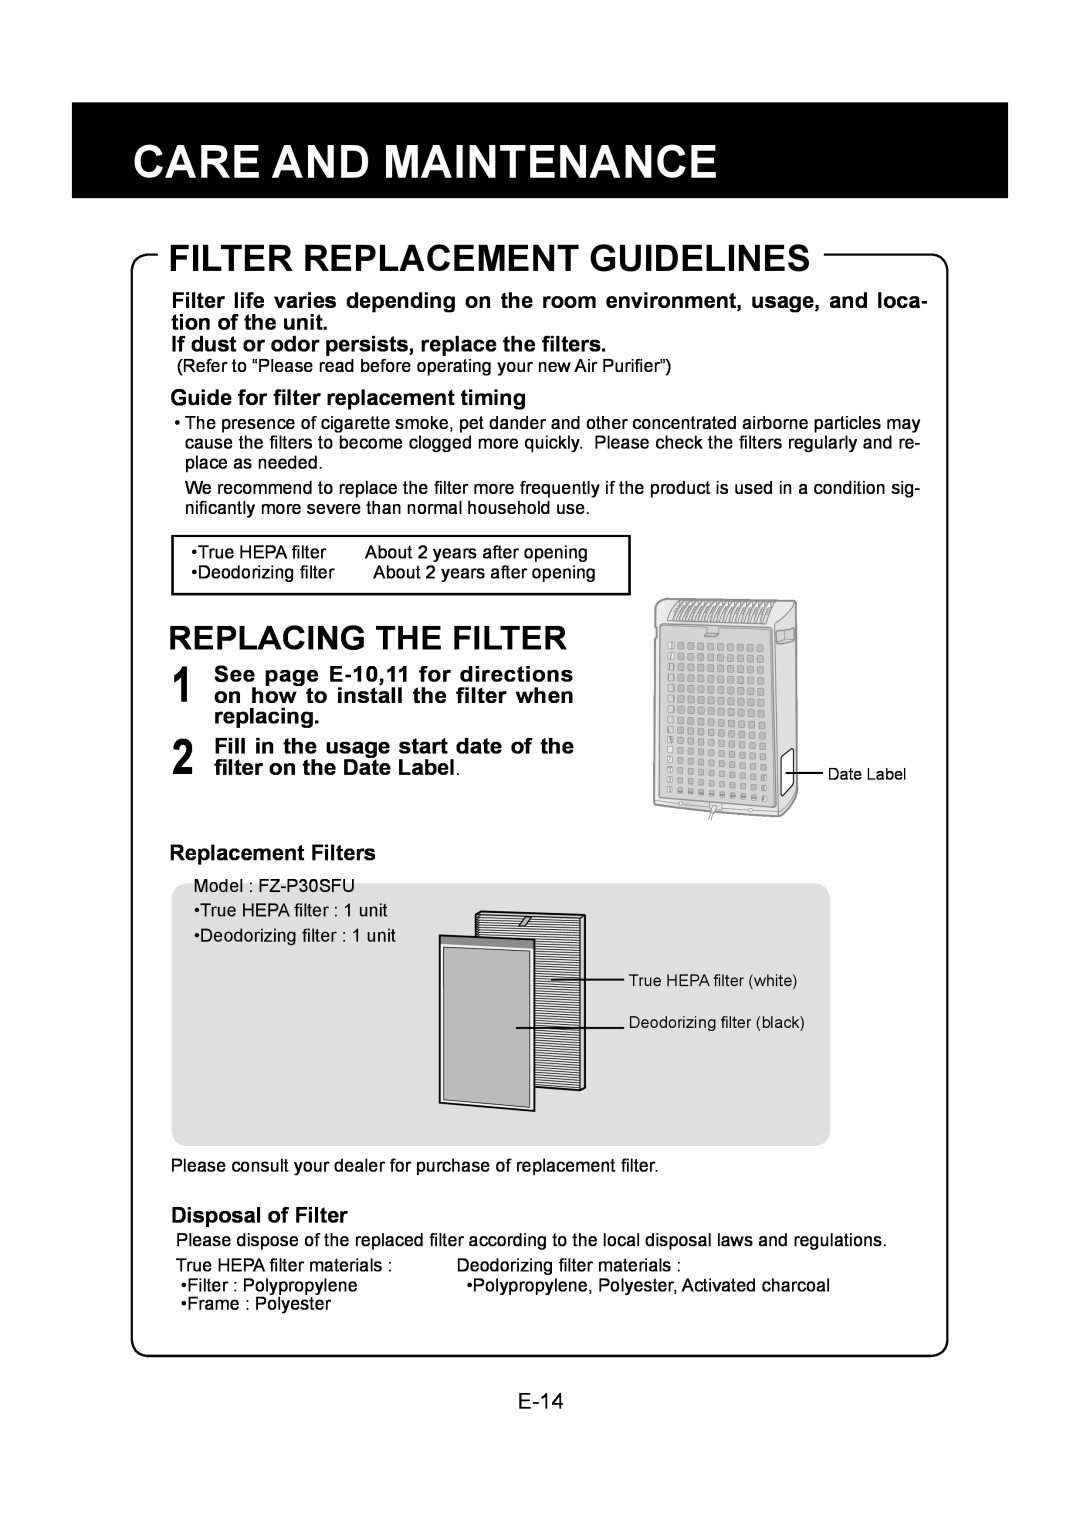 Sharp FP-P30U operation manual Filter Replacement Guidelines, Replacing The Filter, E-14, Care And Maintenance 